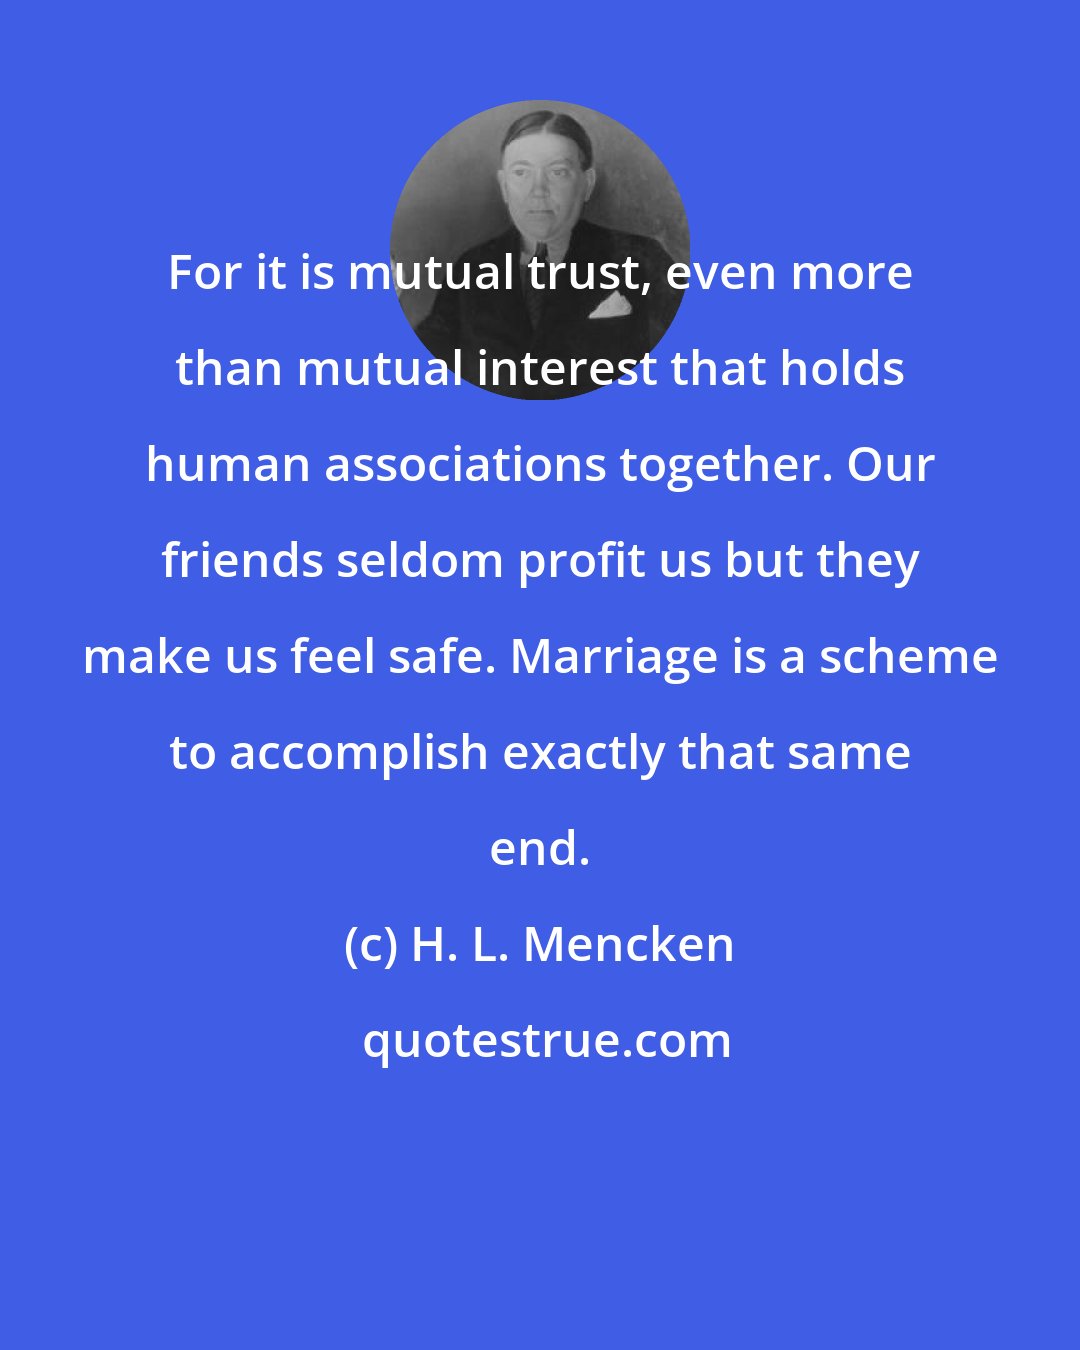 H. L. Mencken: For it is mutual trust, even more than mutual interest that holds human associations together. Our friends seldom profit us but they make us feel safe. Marriage is a scheme to accomplish exactly that same end.